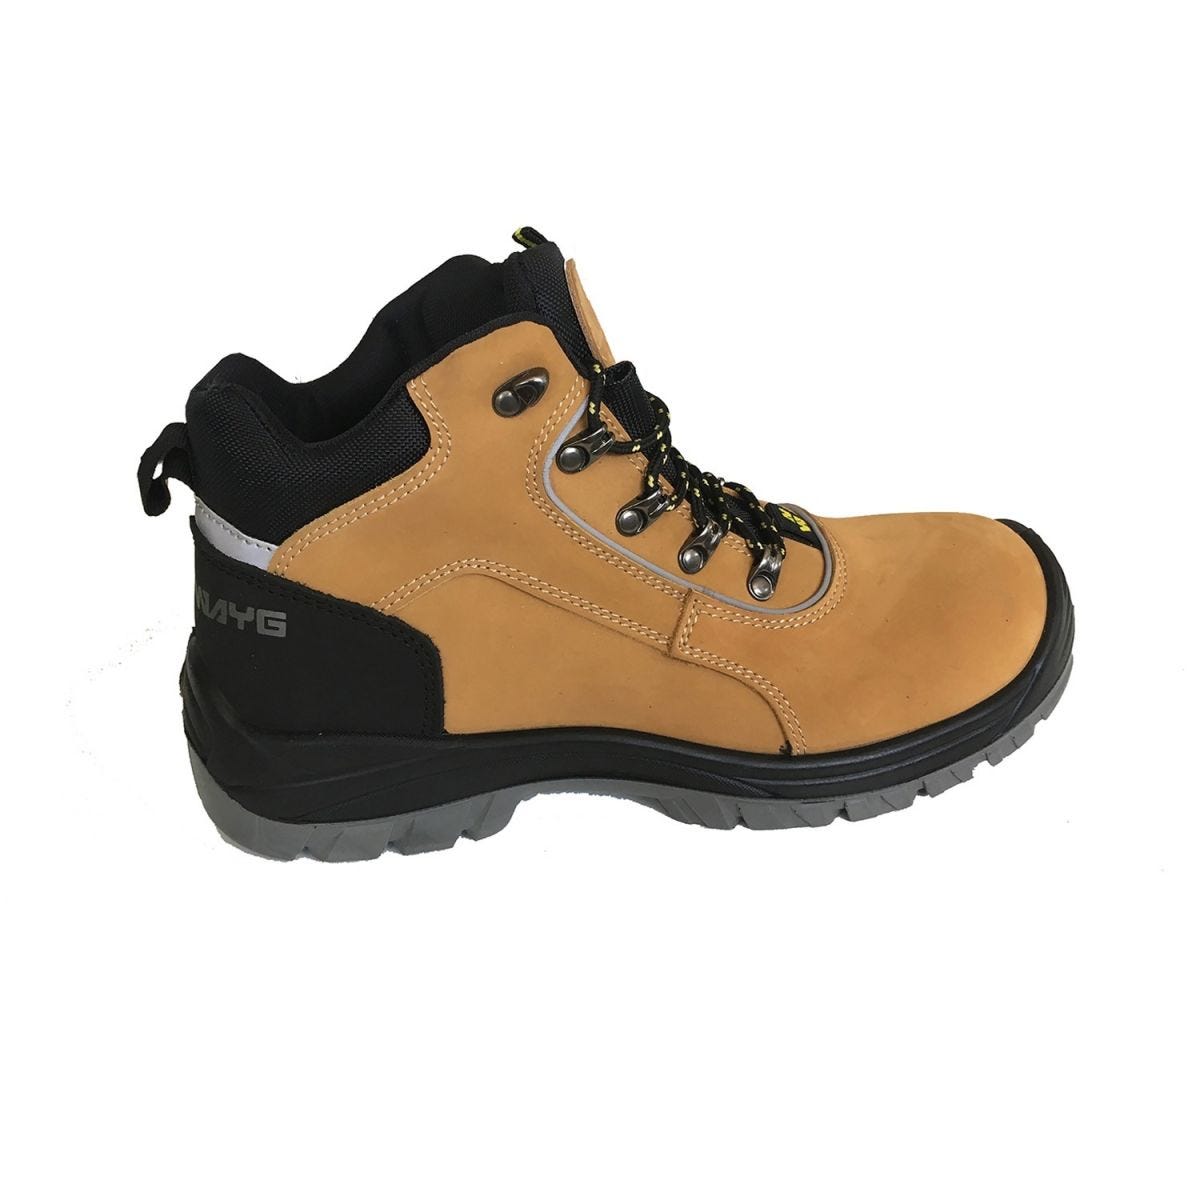 CHAUSSURES MONTANTES DE SECURITE RYAN CAMEL - NORTH WAYS - Taille 47 1